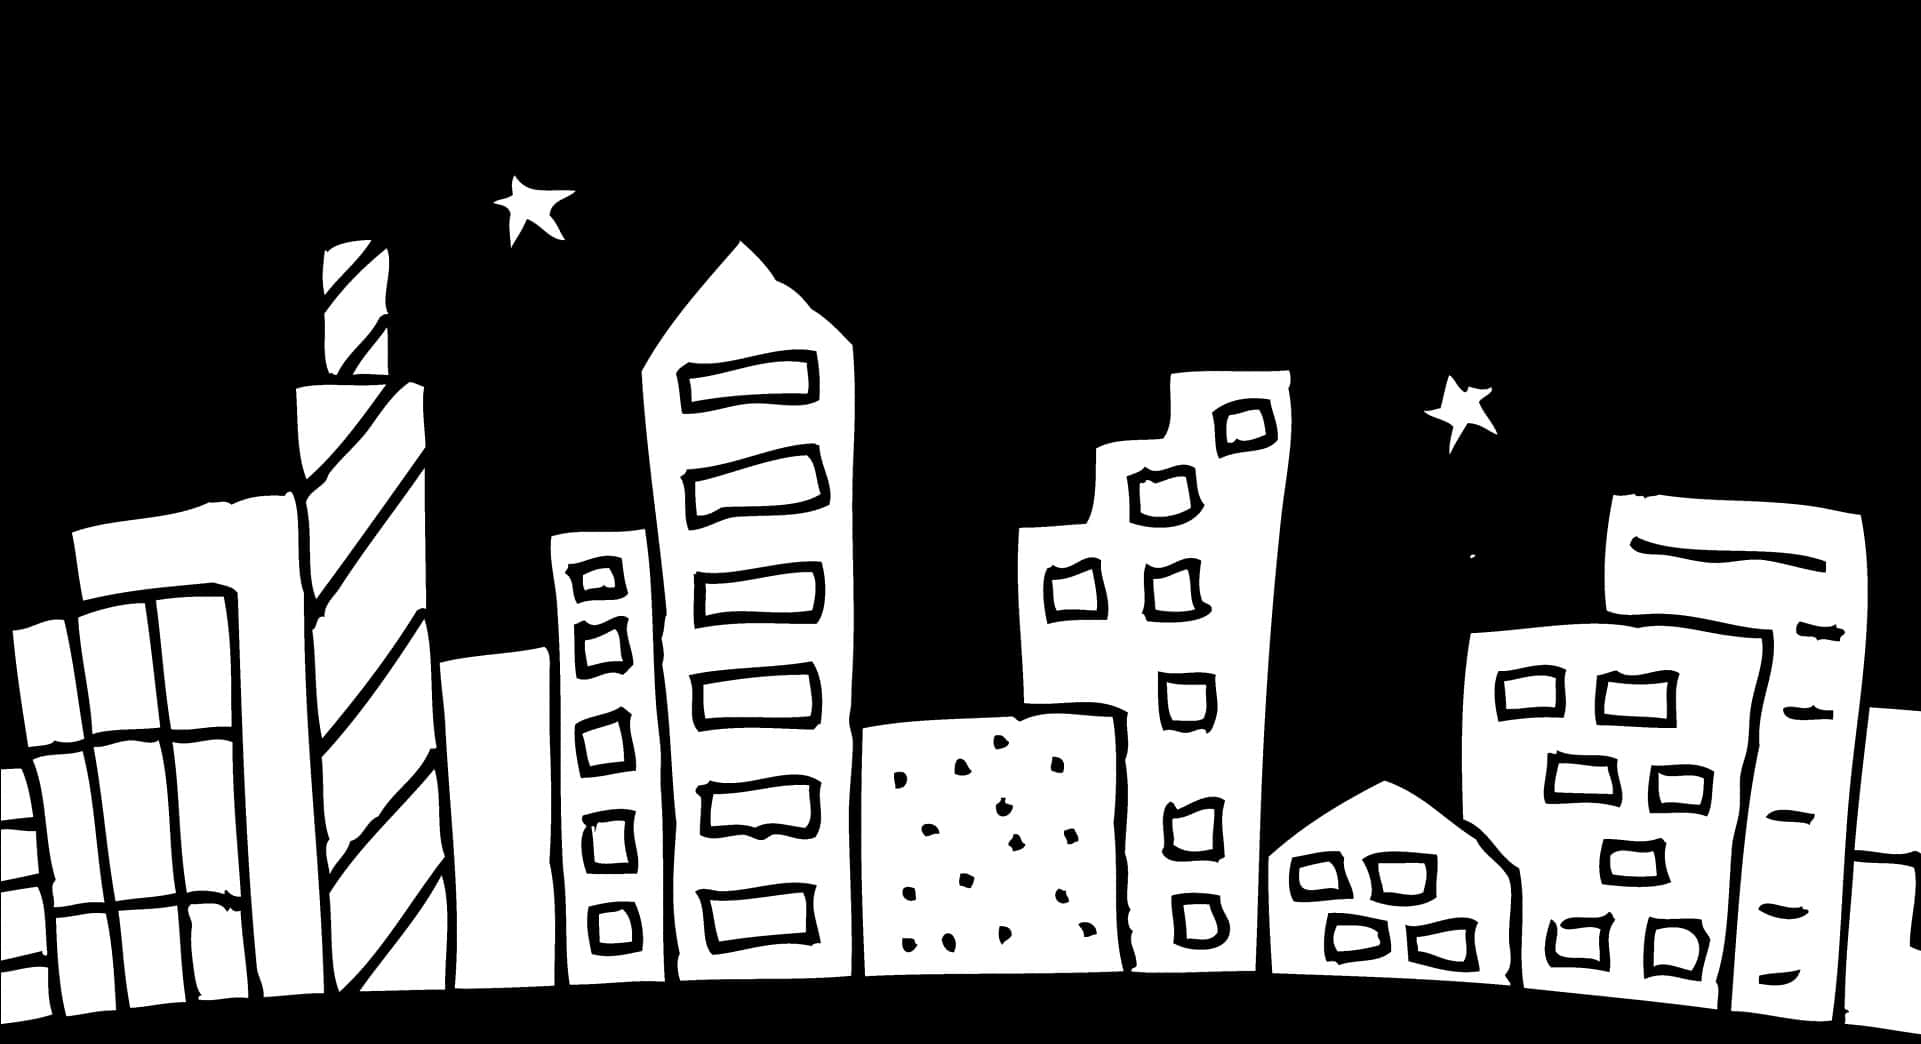 City And Stars Sketch